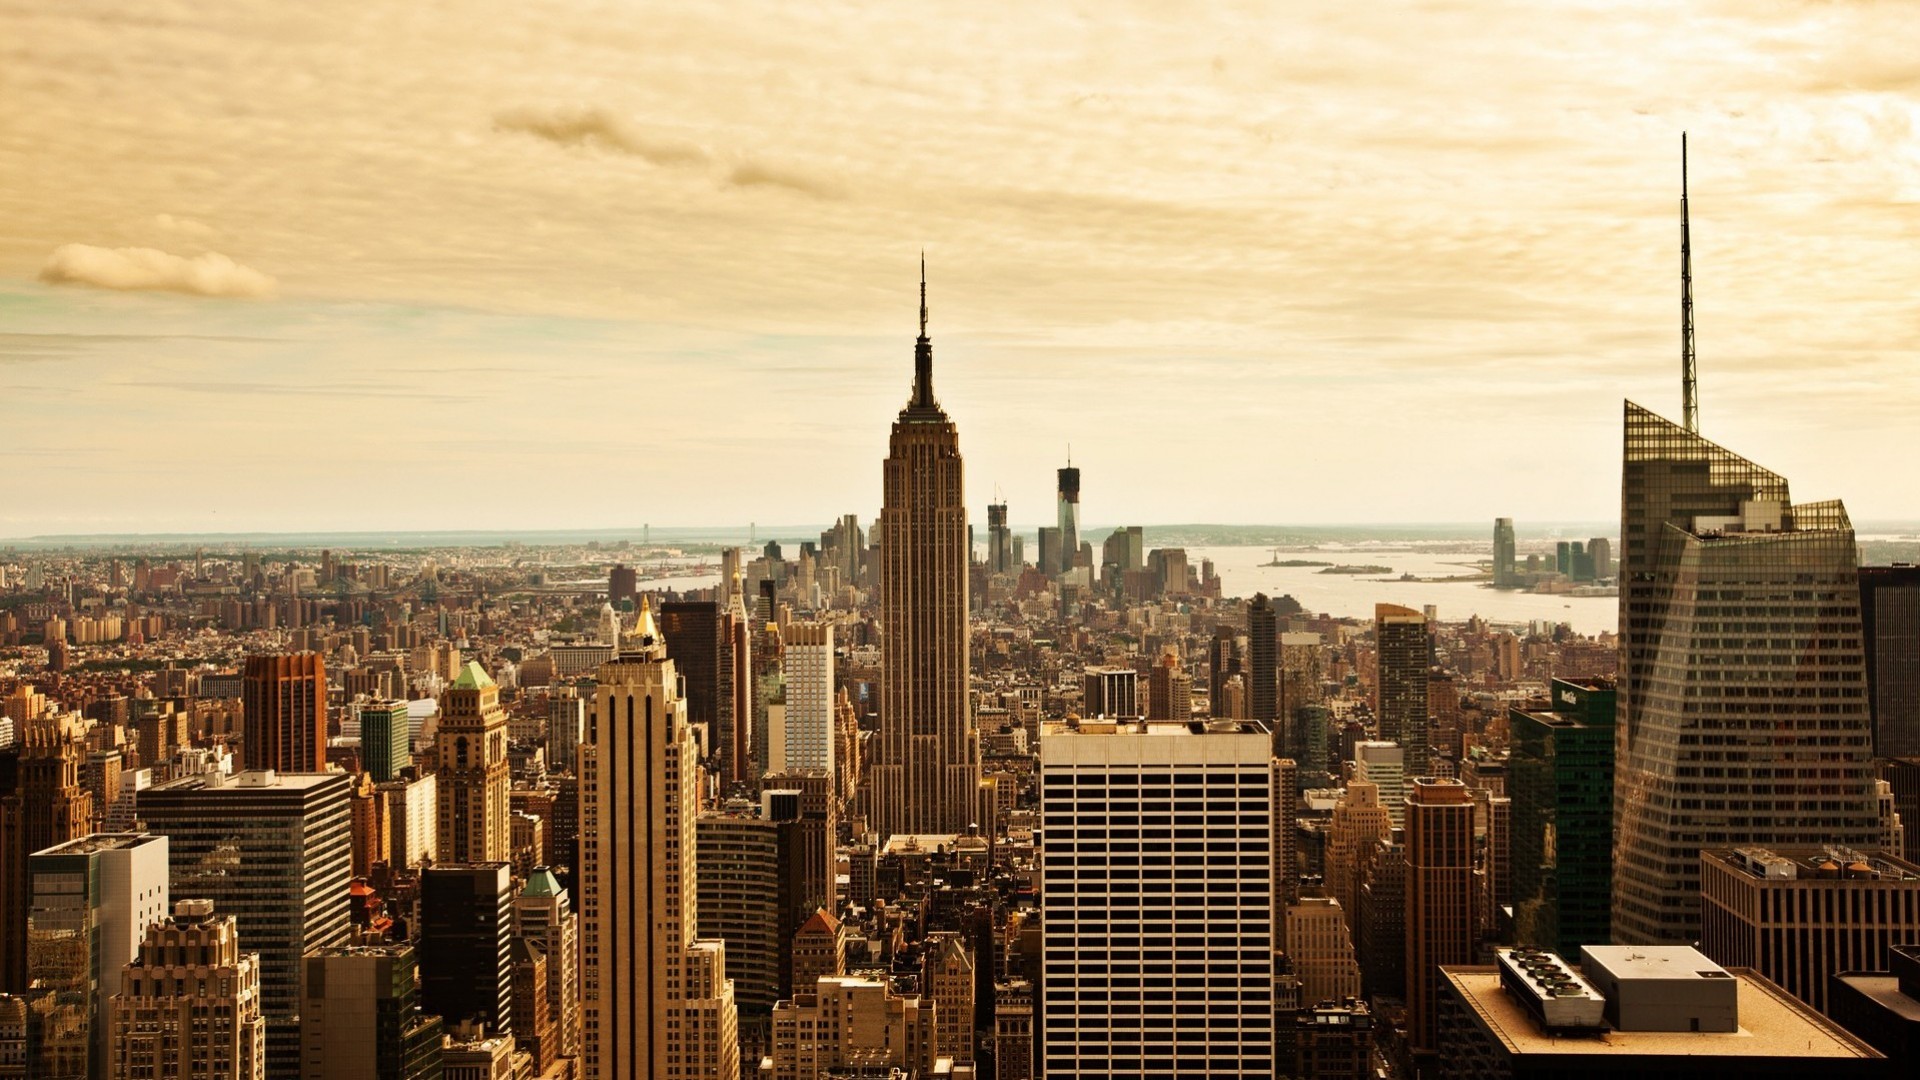 Empire State Building 4k Ultra HD Background Wallpaper